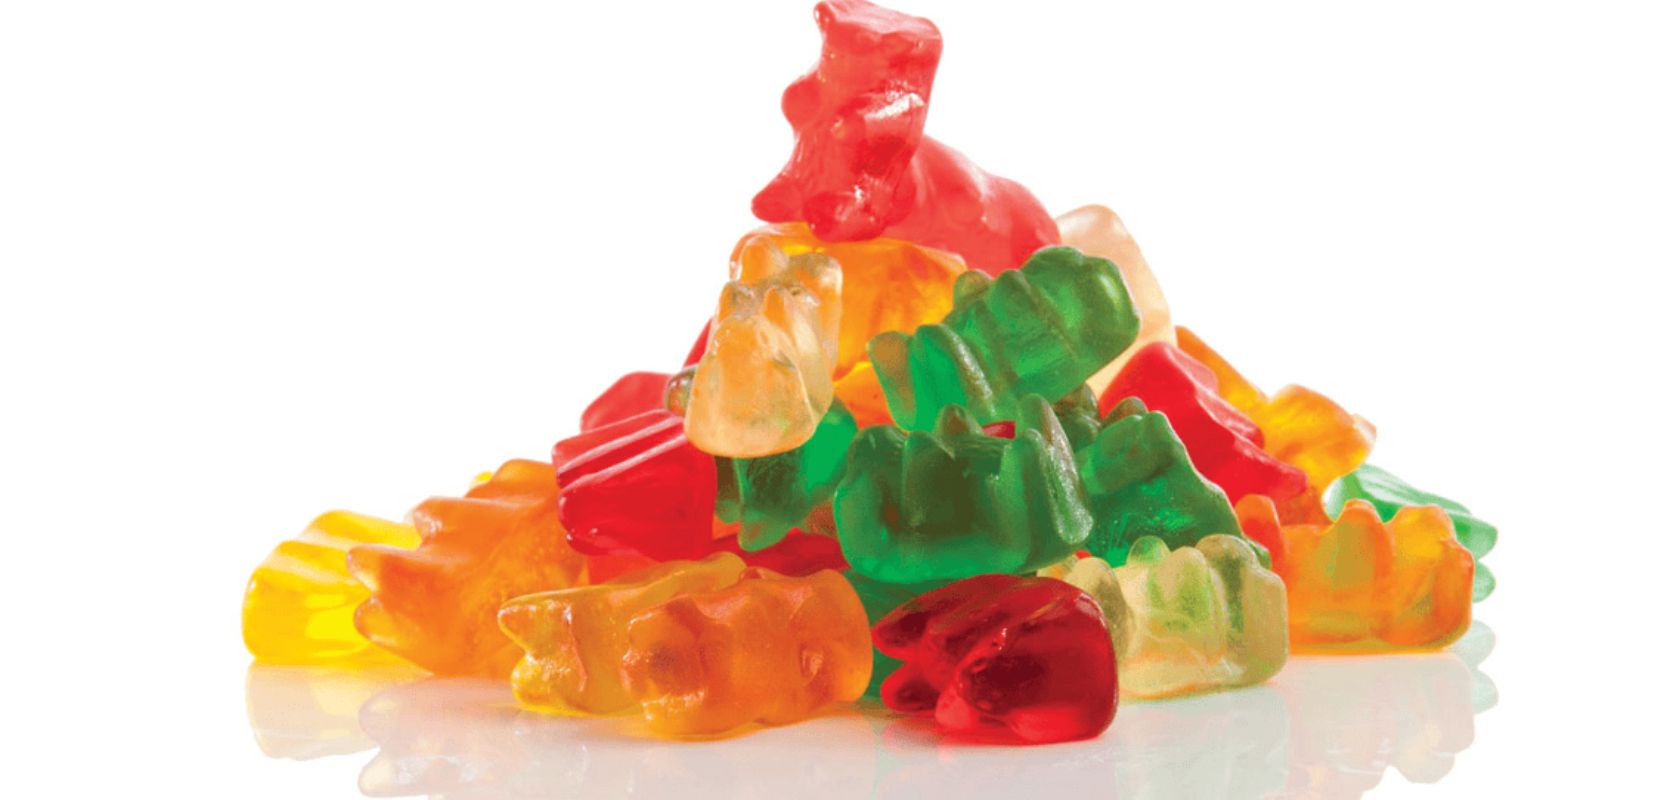 If you're eager to try out the awesome effects of cannabis gummies, you're in luck! 